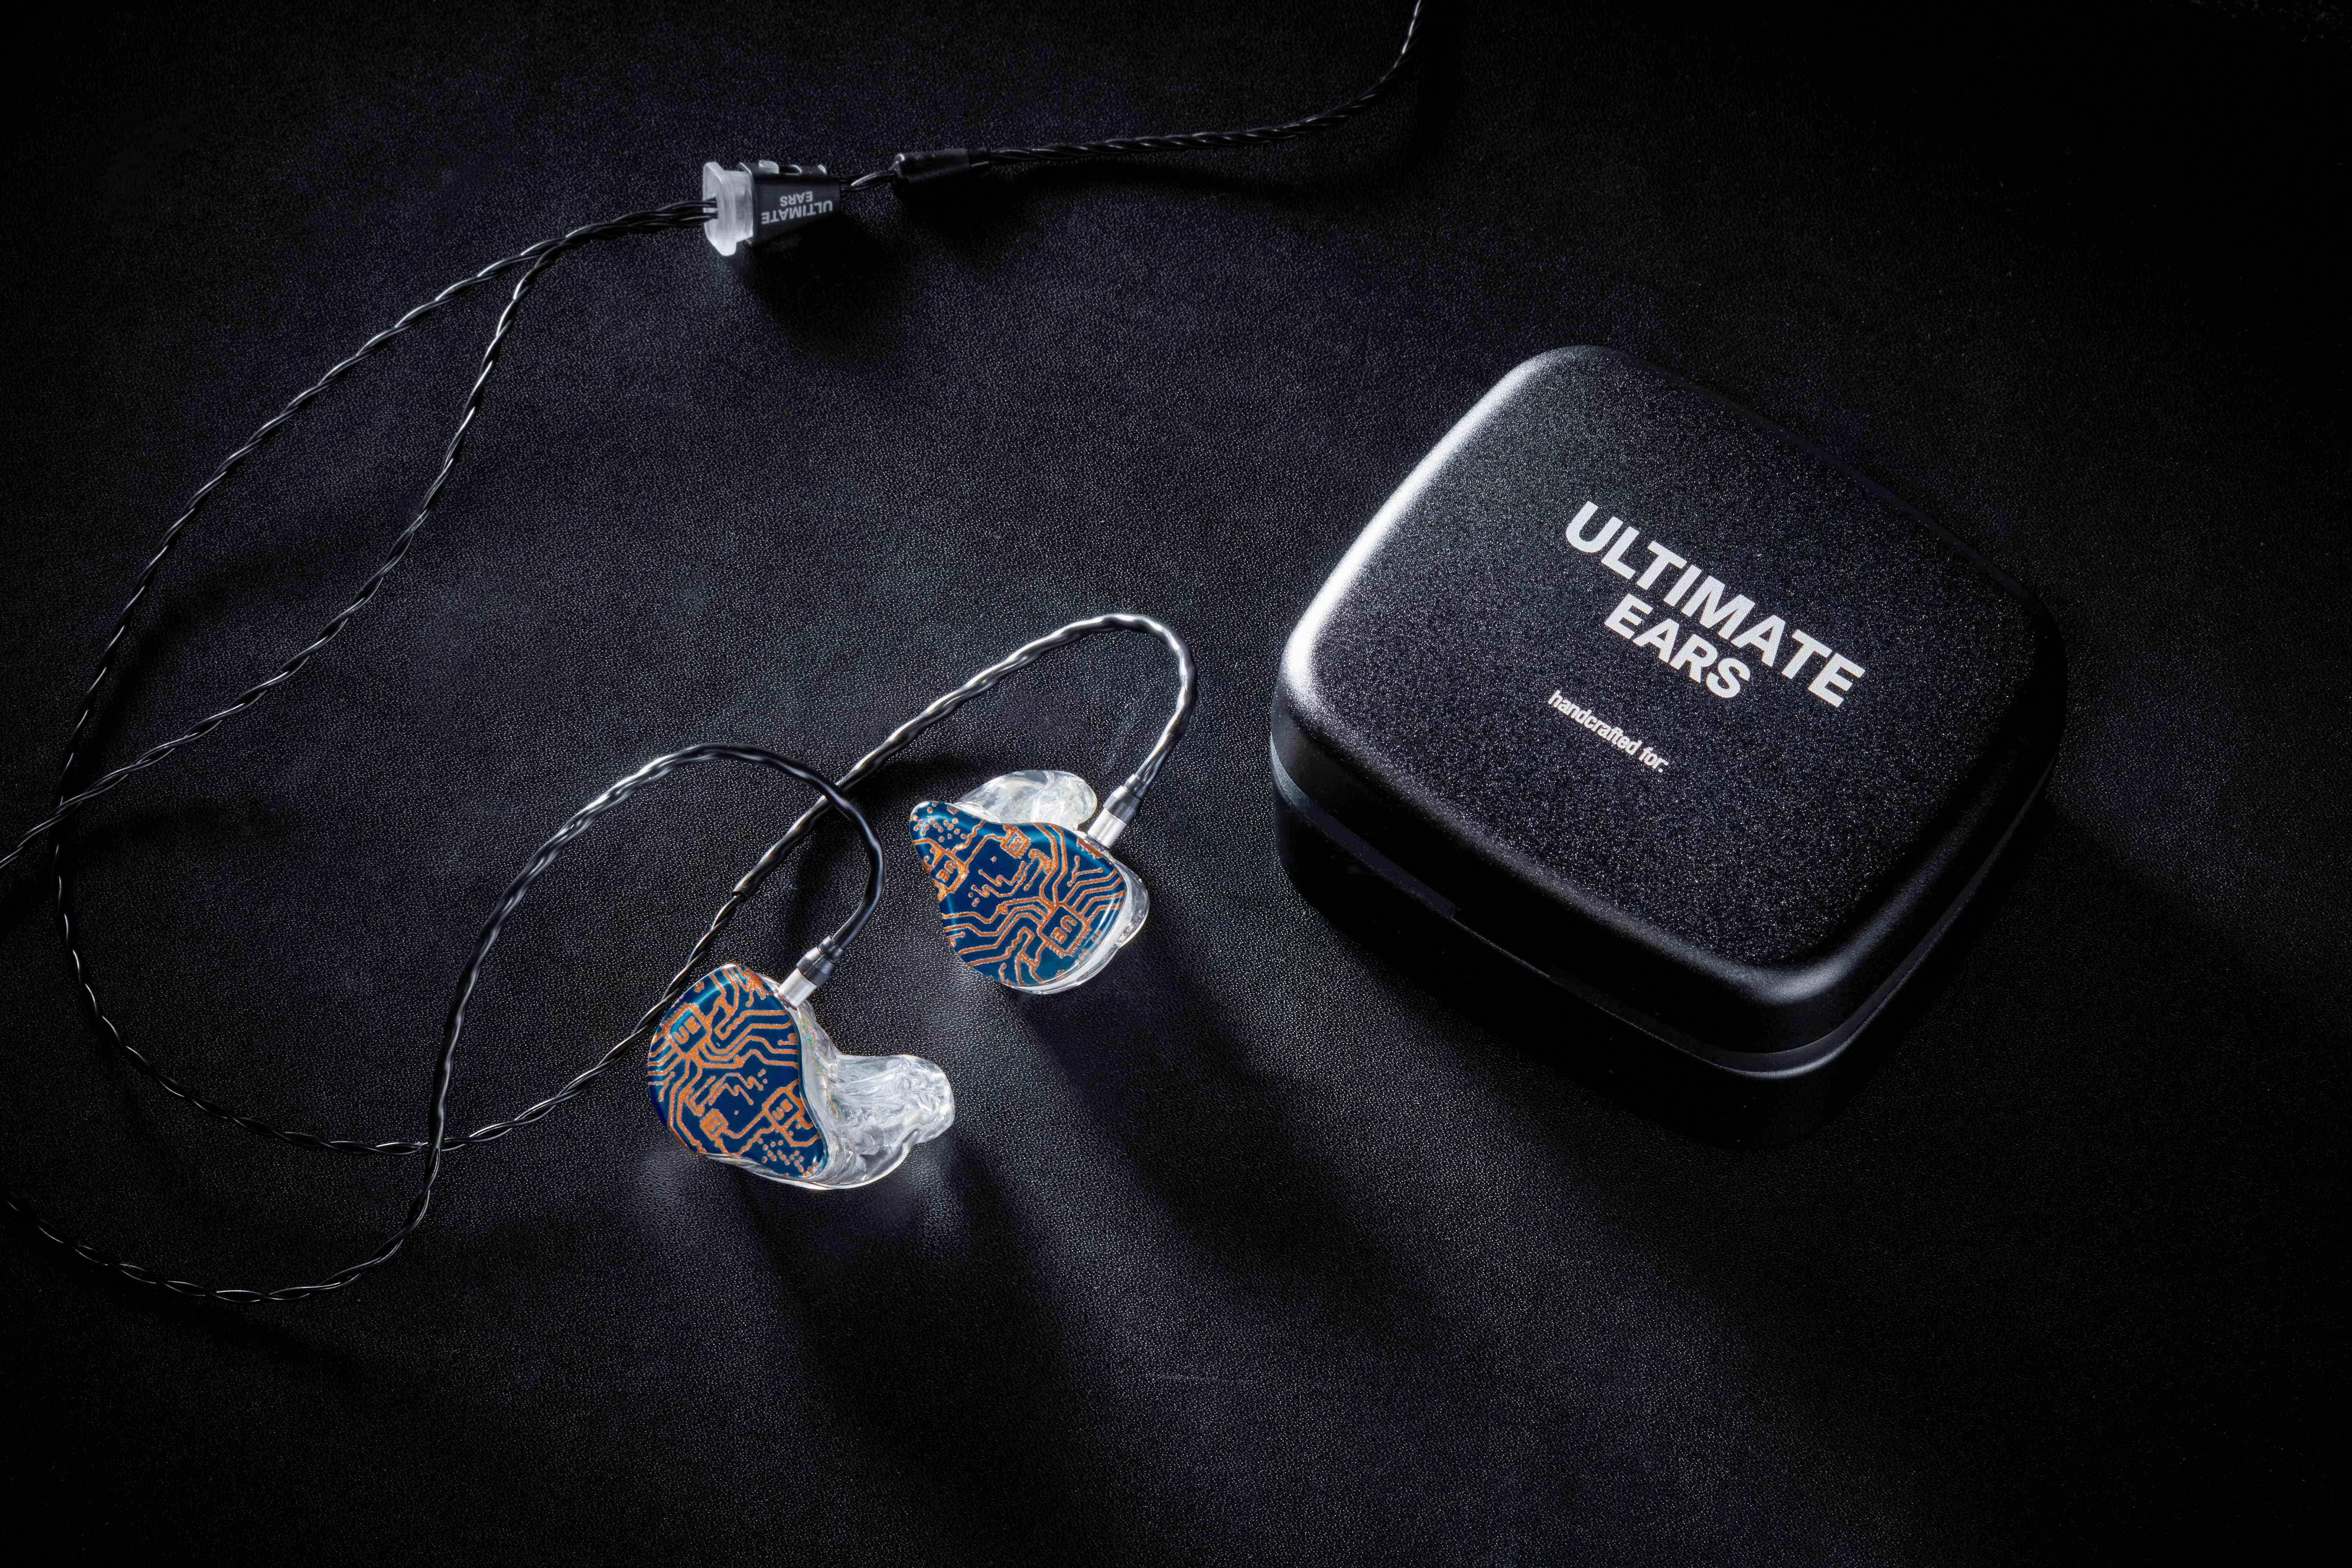 Ultimate Ears Pro & Knowles Surpass Expectations With 21-Driver IEM Design